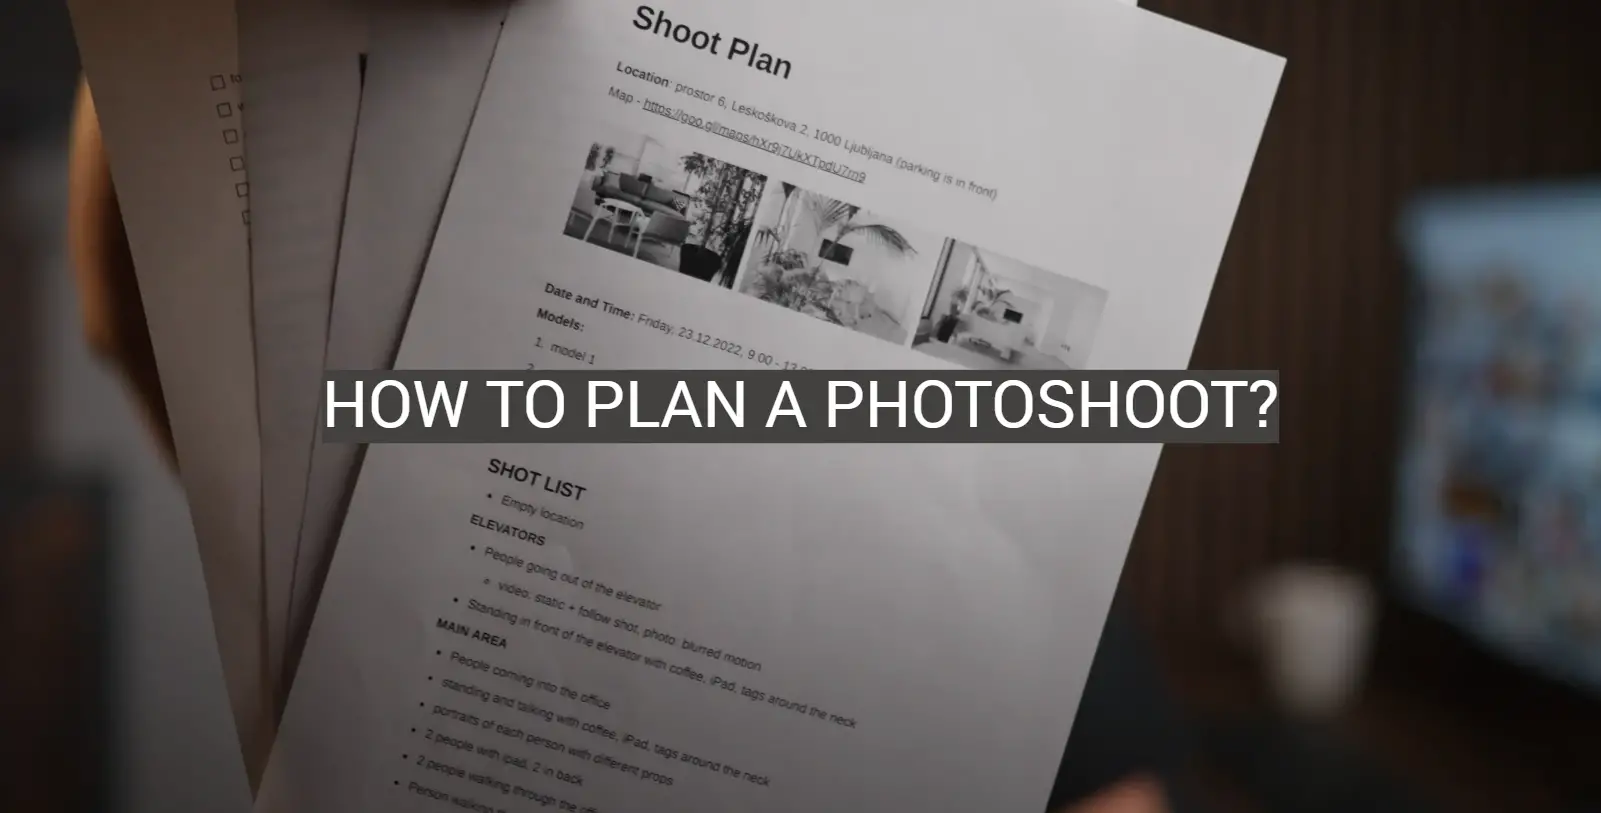 How to Plan a Photoshoot?